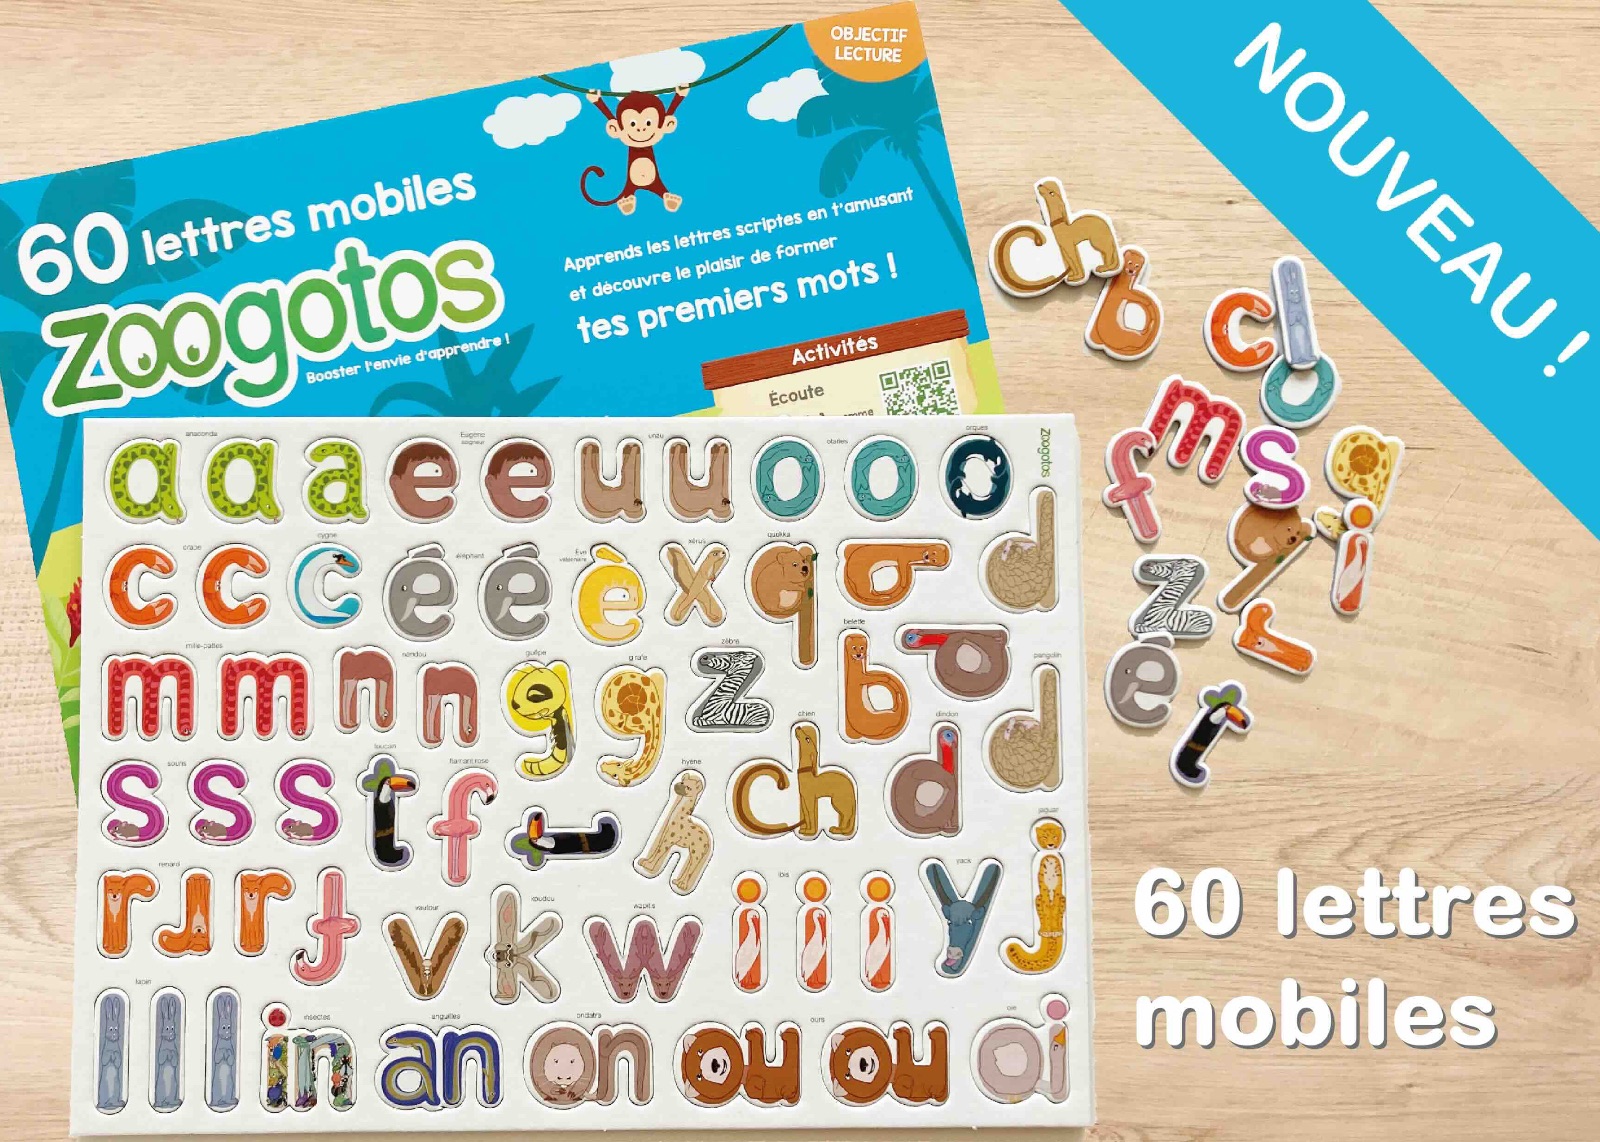 60 lettres mobiles